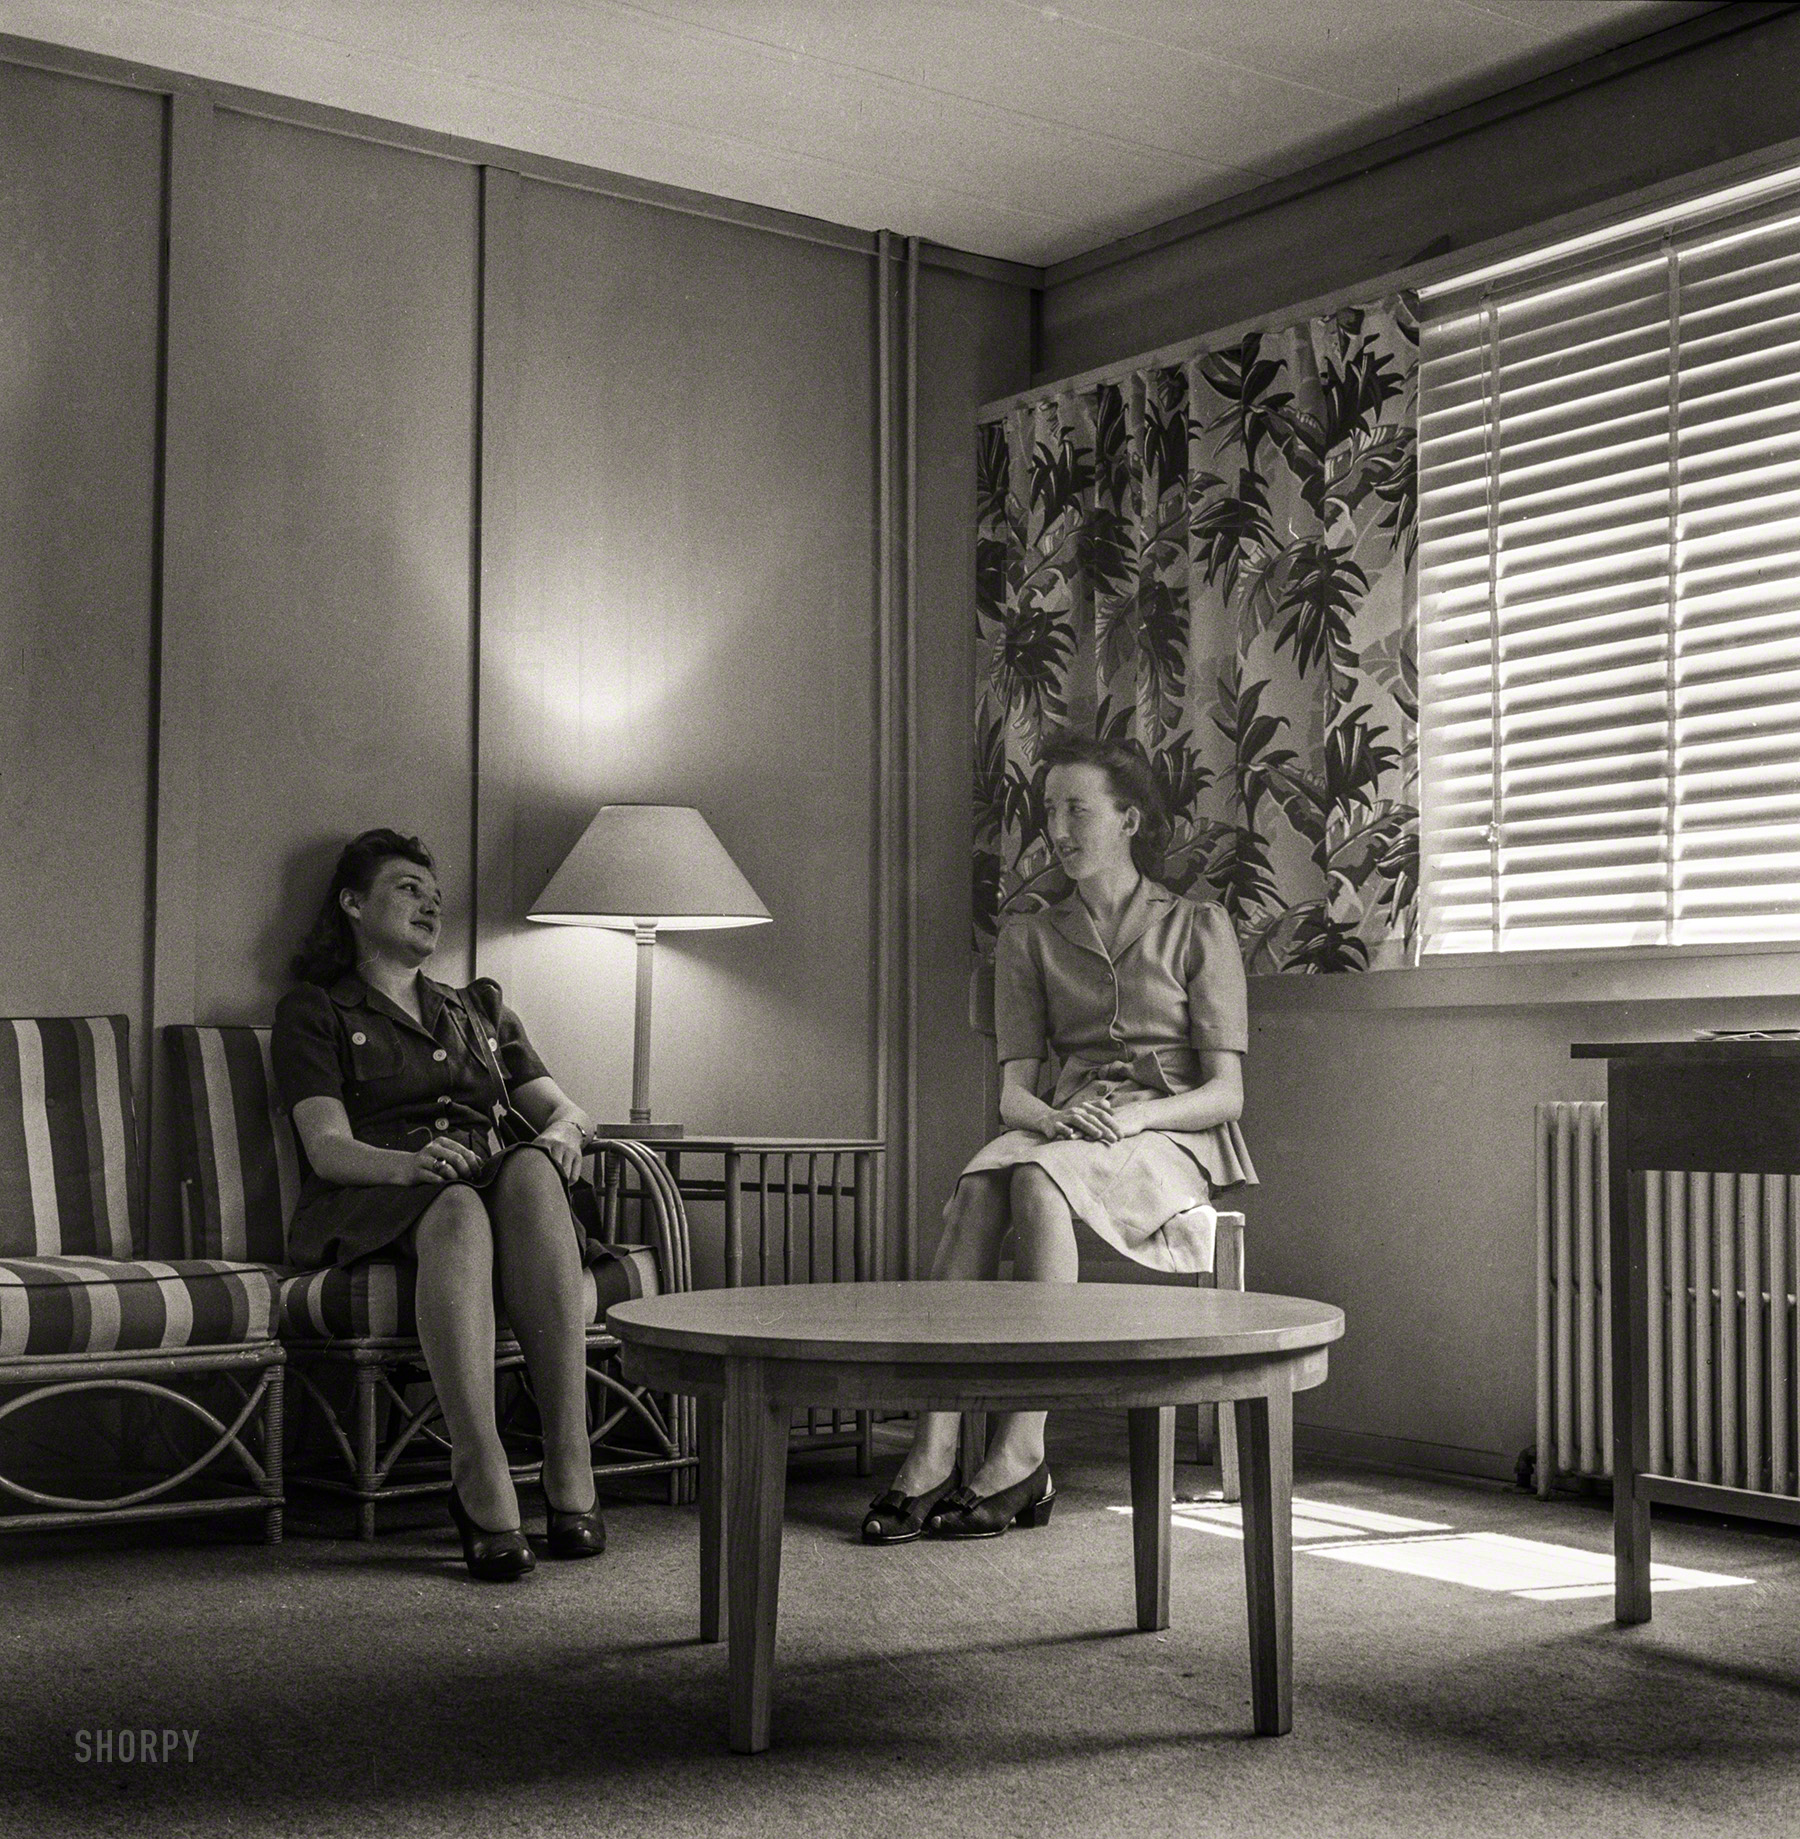 June 1943. Arlington, Virginia. "One of several alcoves off the corridor in Idaho Hall, Arlington Farms, a residence for women who work in the U.S. government for the duration of the war." Medium format nitrate negative by Esther Bubley for the Office of War Information. View full size.